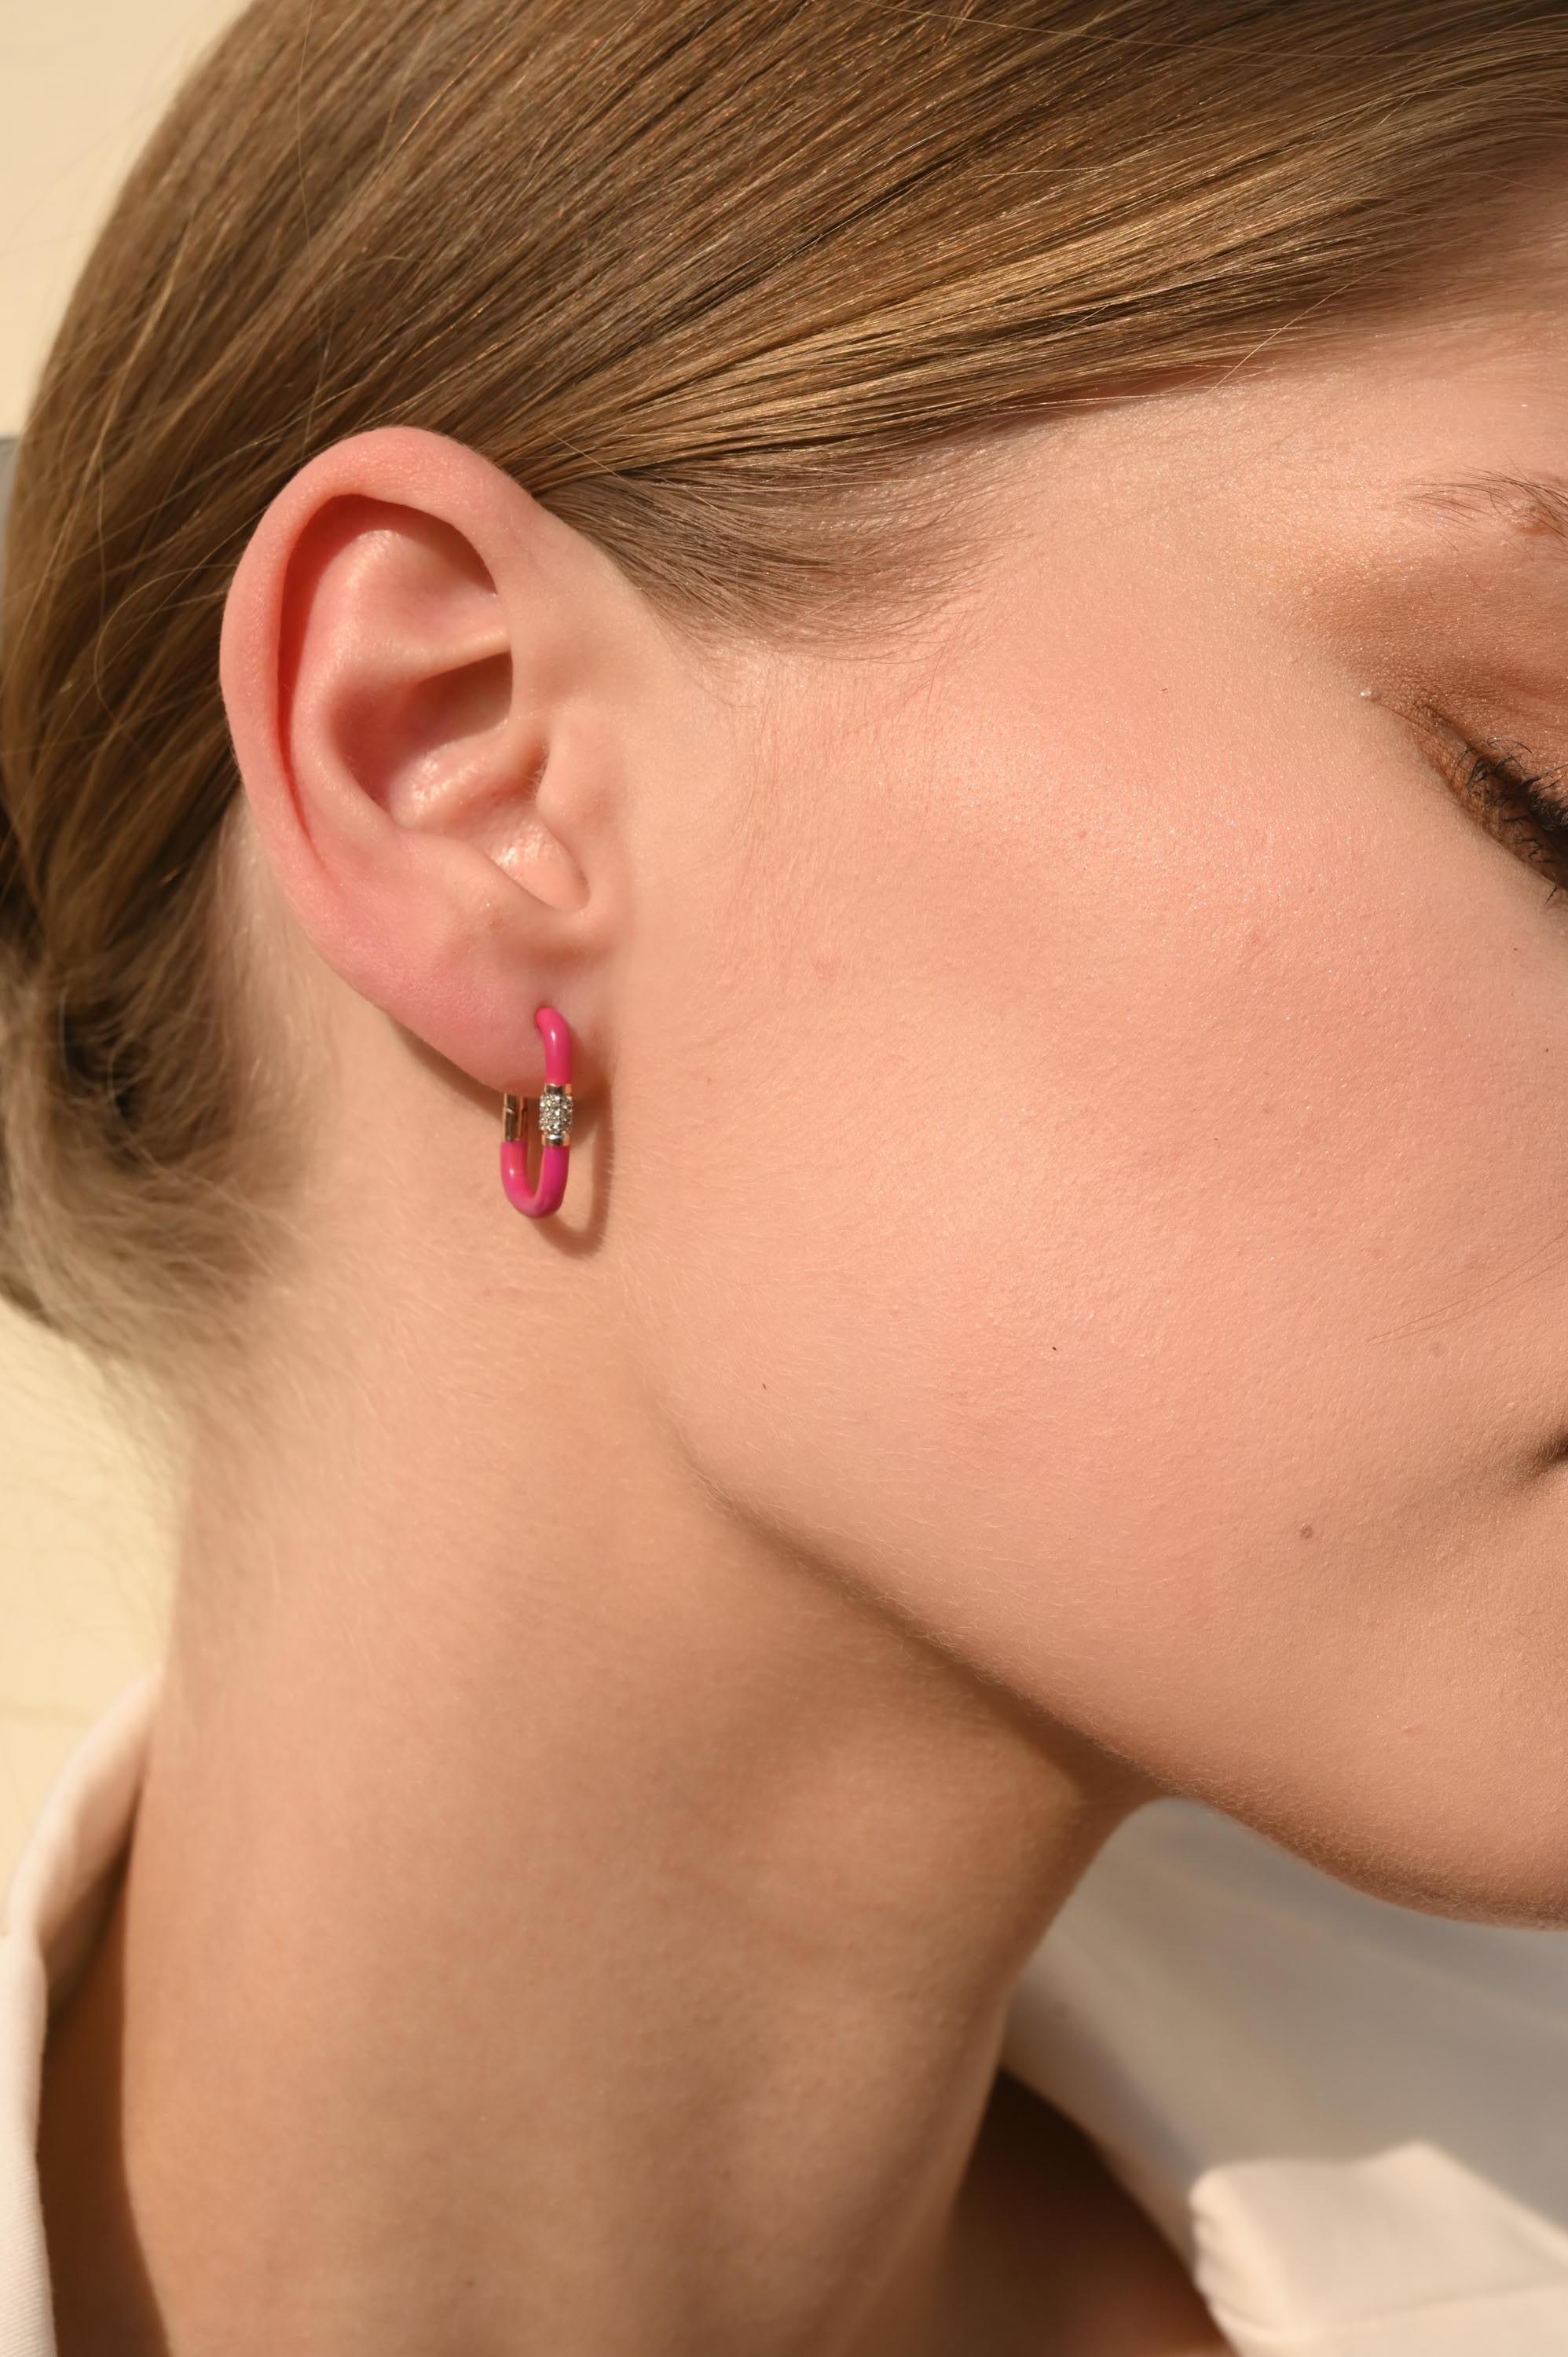 Rectangle Pink Enamel And Diamond Hoops Earring in 14k Gold. A fun, colorful, and personalized addition to your earring stack! Stay on trend by adding these flamboyant enamel pieces and give yourself a fresh look! 
April birthstone diamond brings